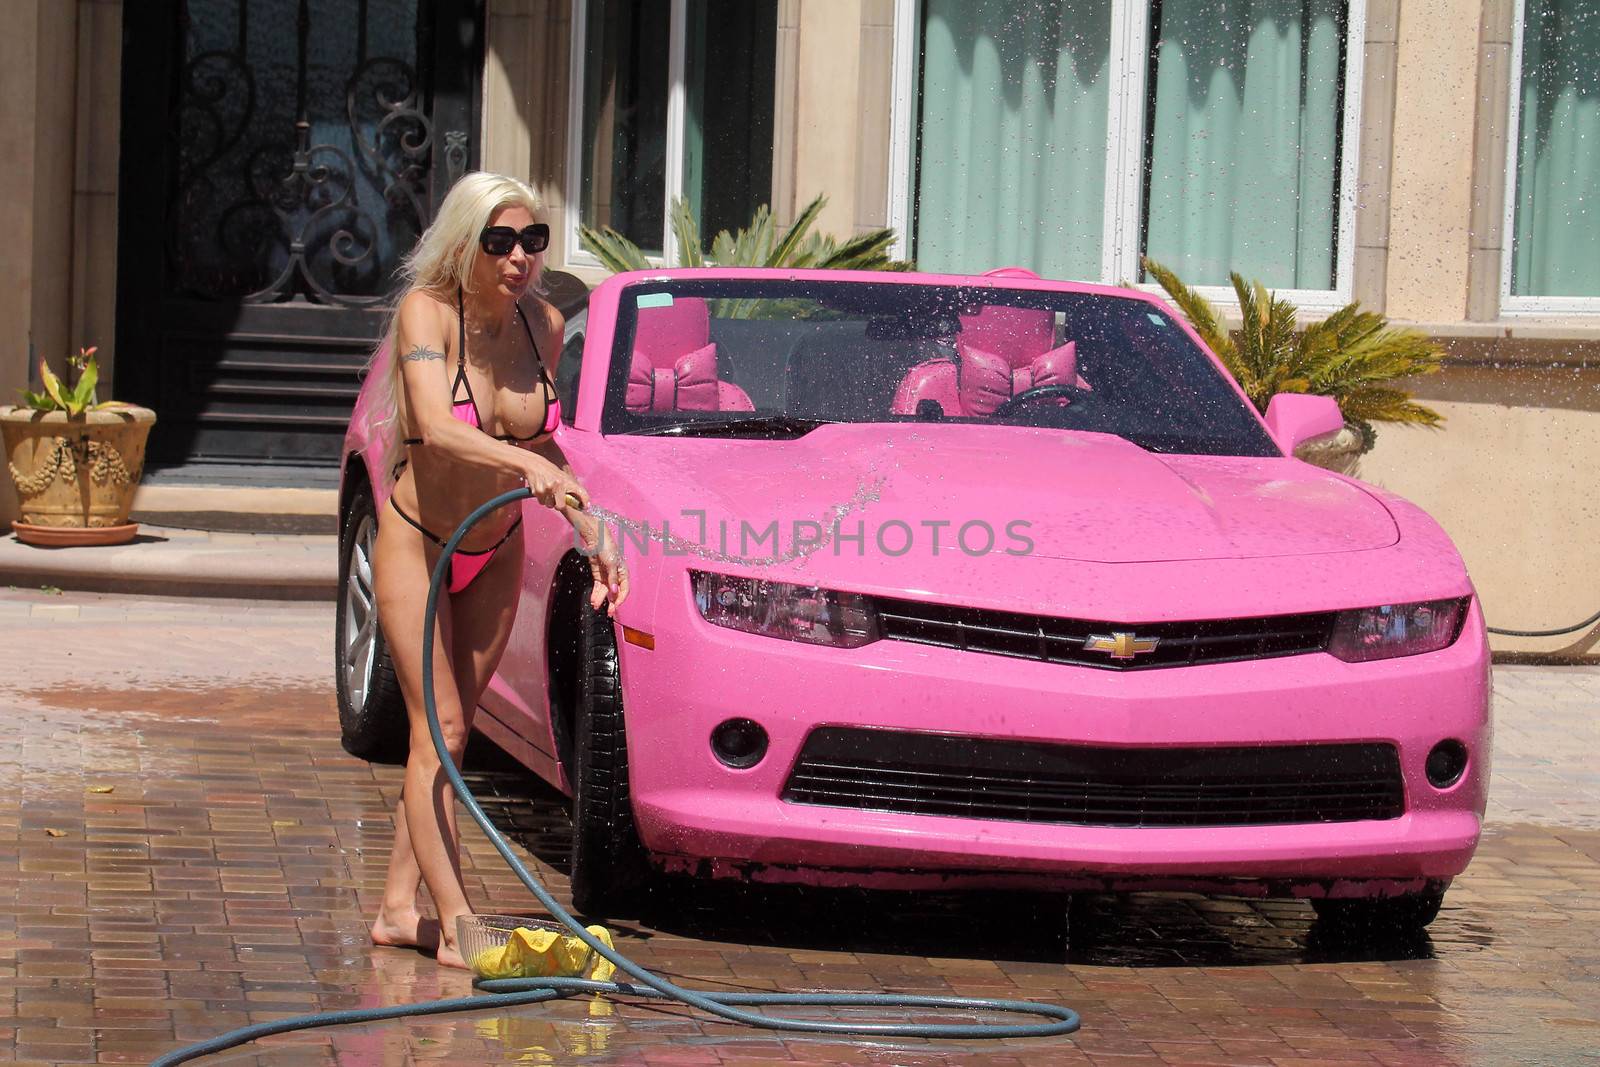 Frenchy Morgan the "Celebrity Big Brother" Star is spotted on a hot day wearing a tiny pink bikini while washing her pink car in Malibu, CA 05-22-17/ImageCollect by ImageCollect